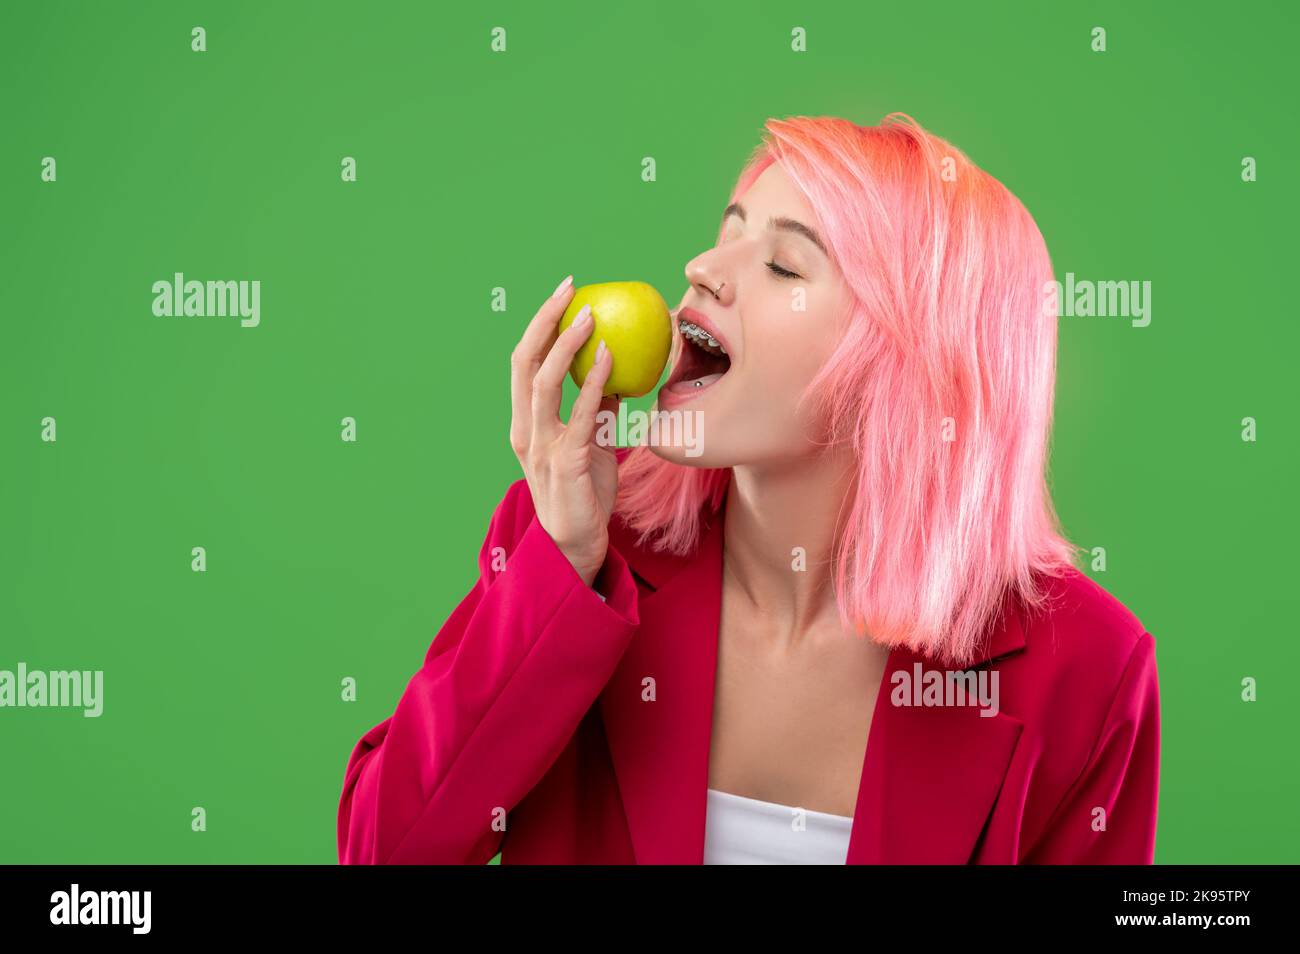 Stylish young lady eating fruit in front of the camera Stock Photo